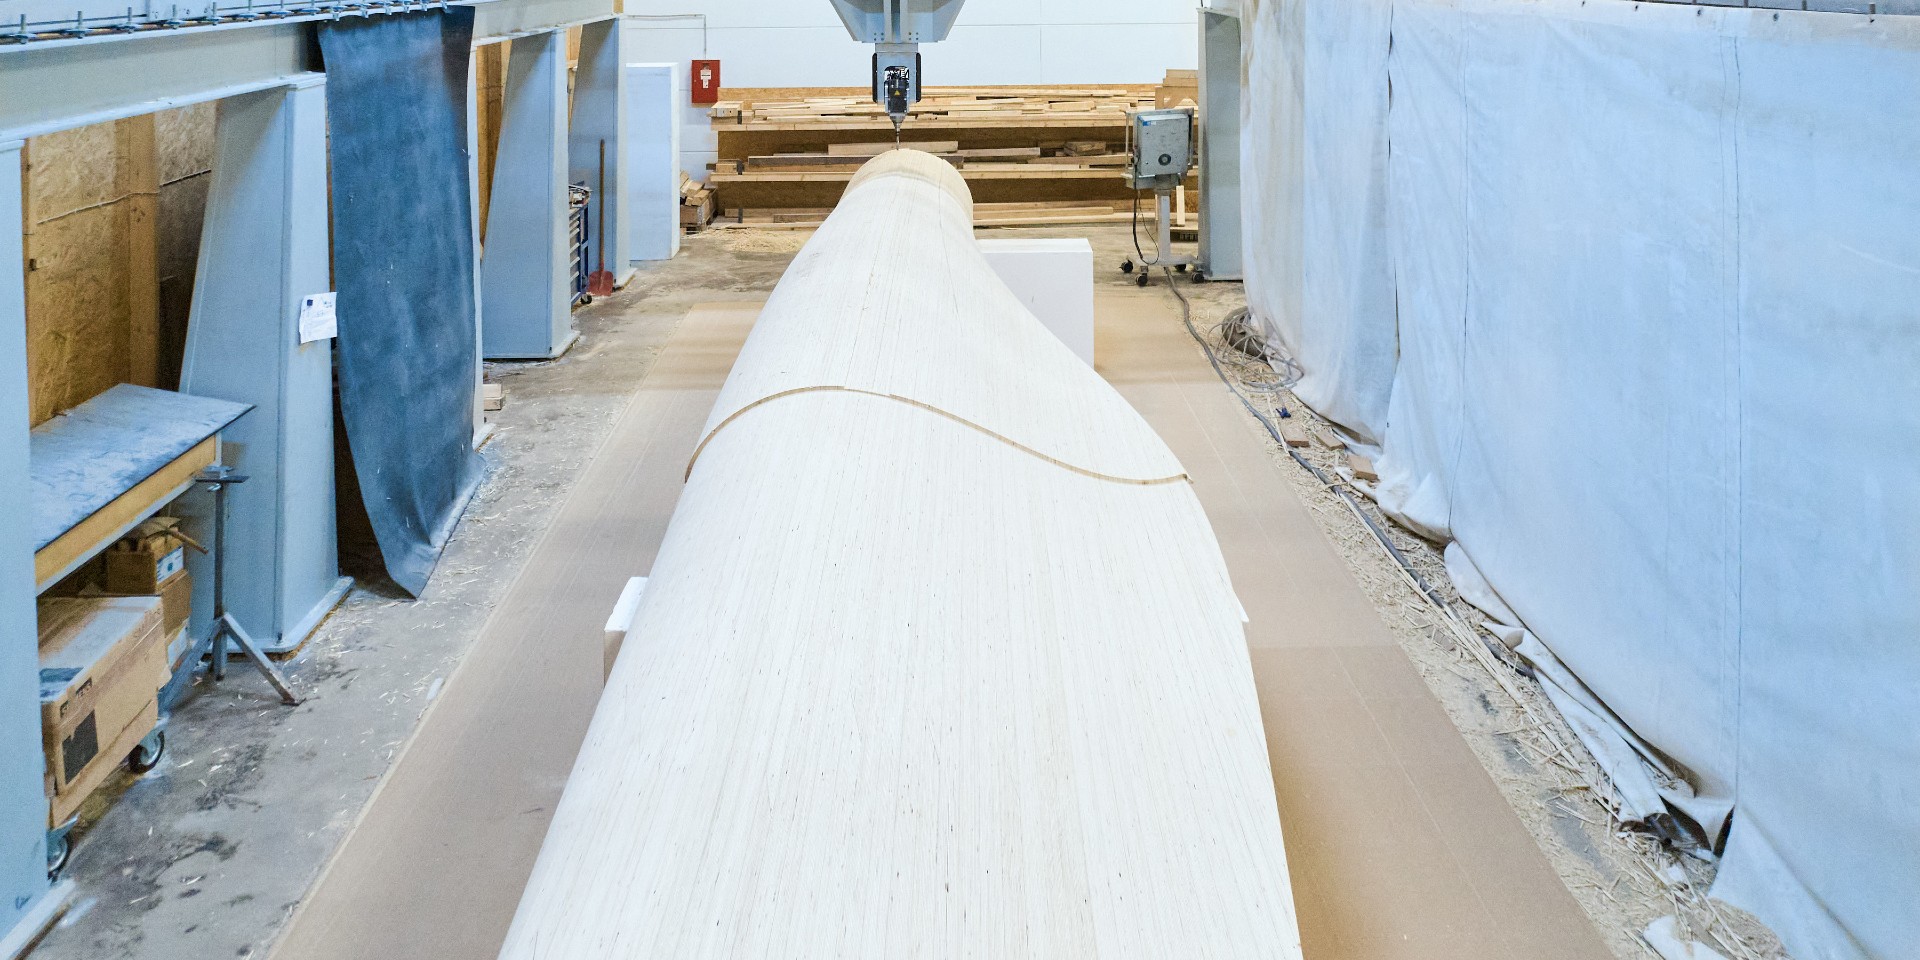 This German startup is pioneering recyclable wooden wind turbine blades